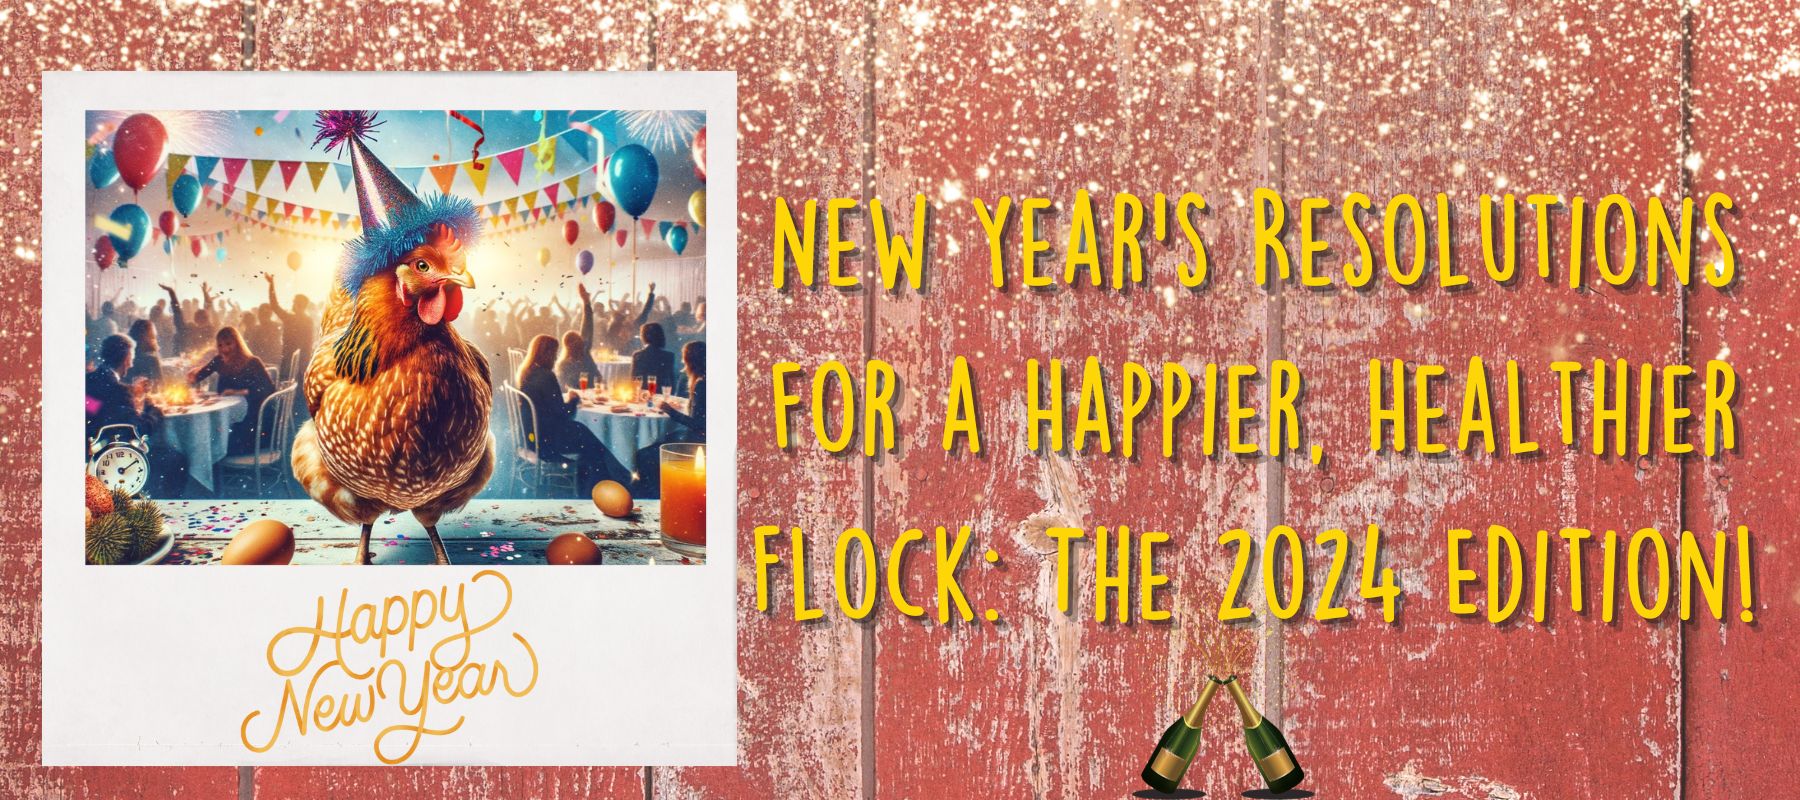 New Year's Resolutions for a Happier, Healthier Flock: The 2024 Edition!